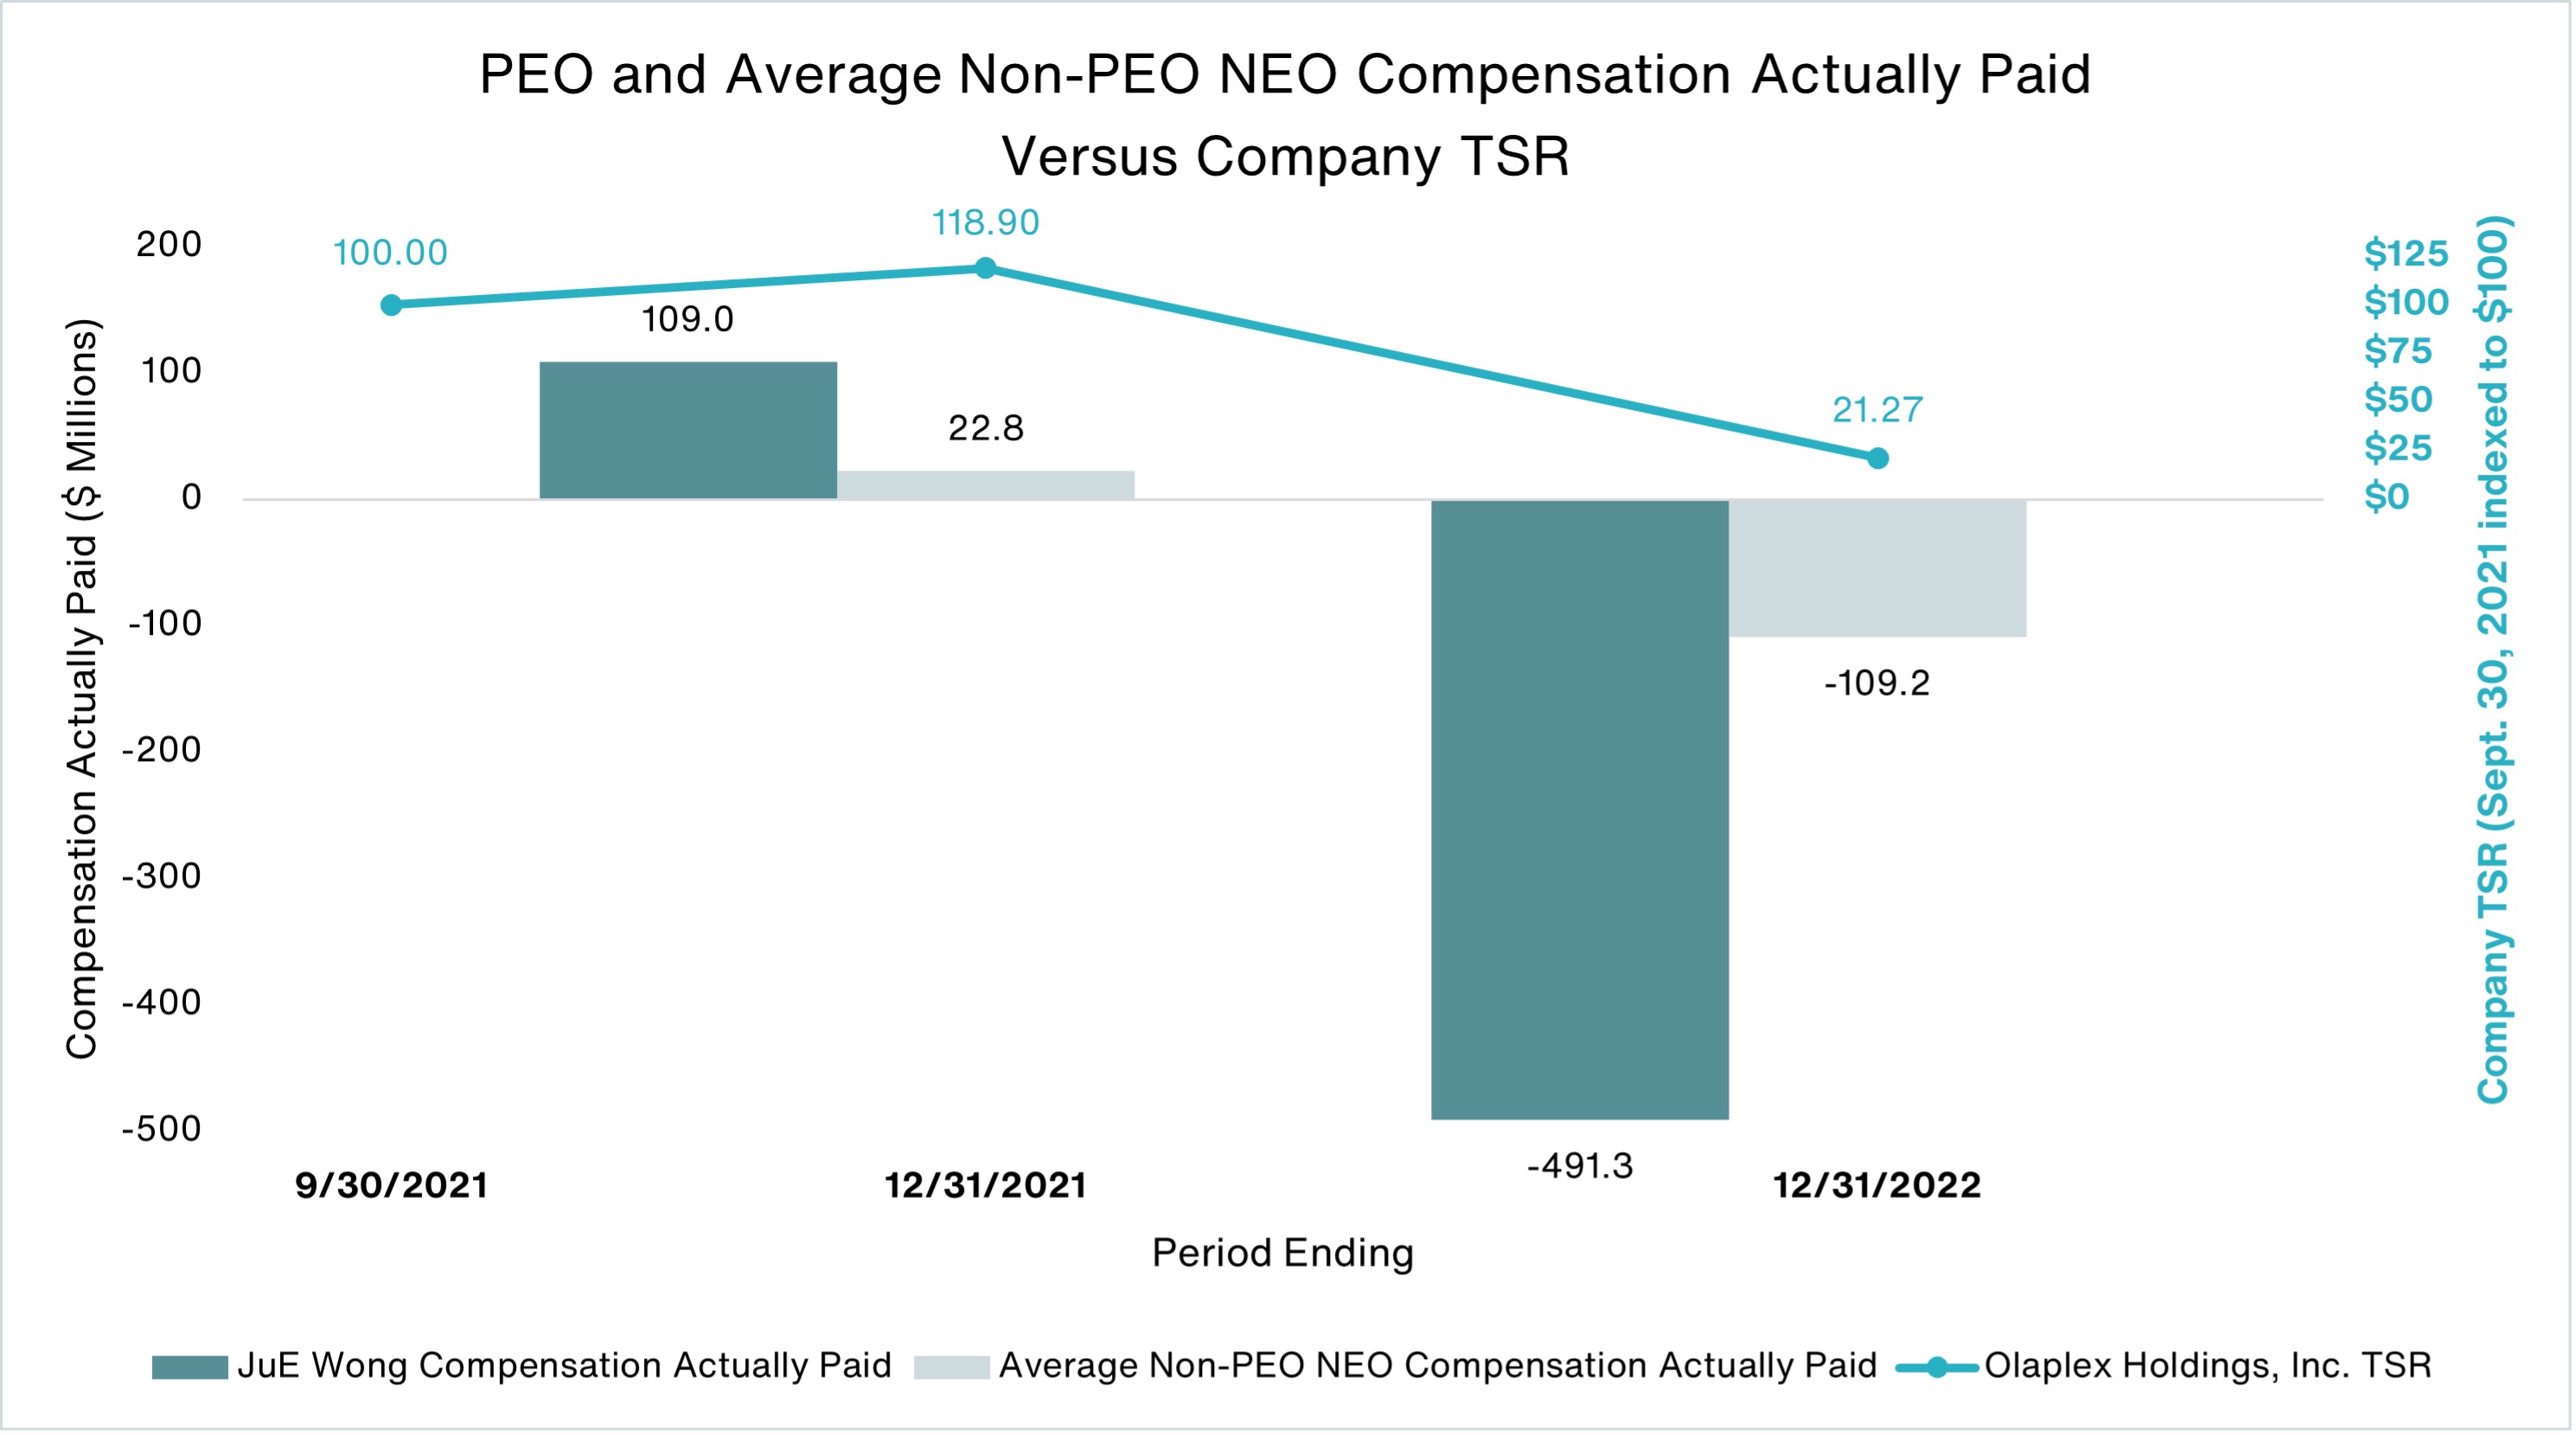 Trended Bar Chart of PEO and Average Non PEO NEO Compensation Actually Paid v. Company TSR showing a decrease of compensation with a decrease in TSR